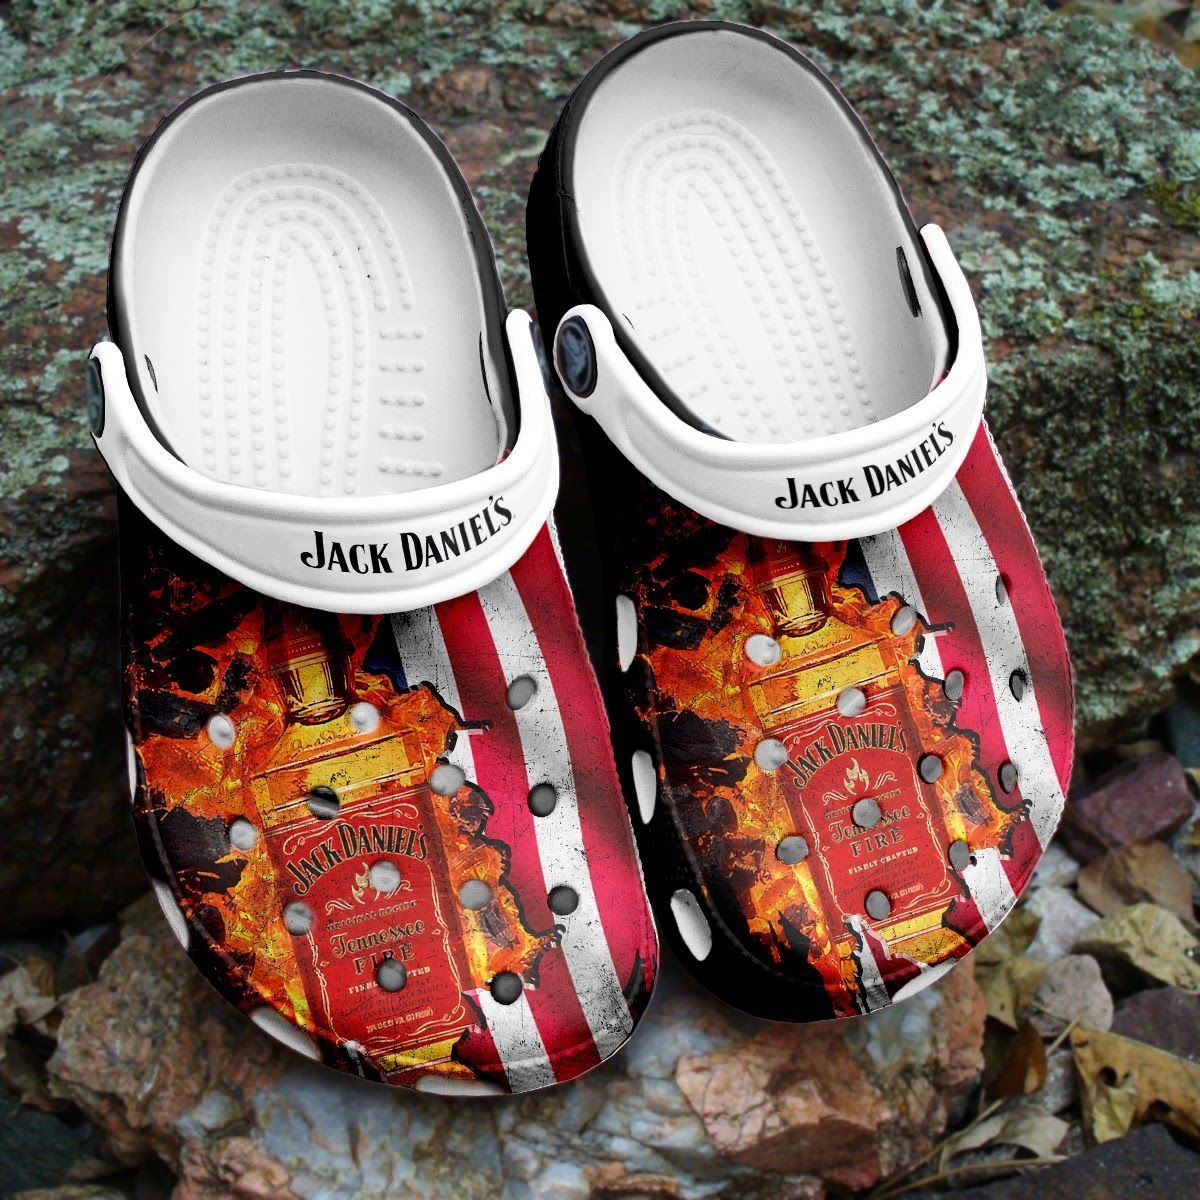 If you'd like to purchase a pair of Crocband Clogs, be sure to check out the official website. 140